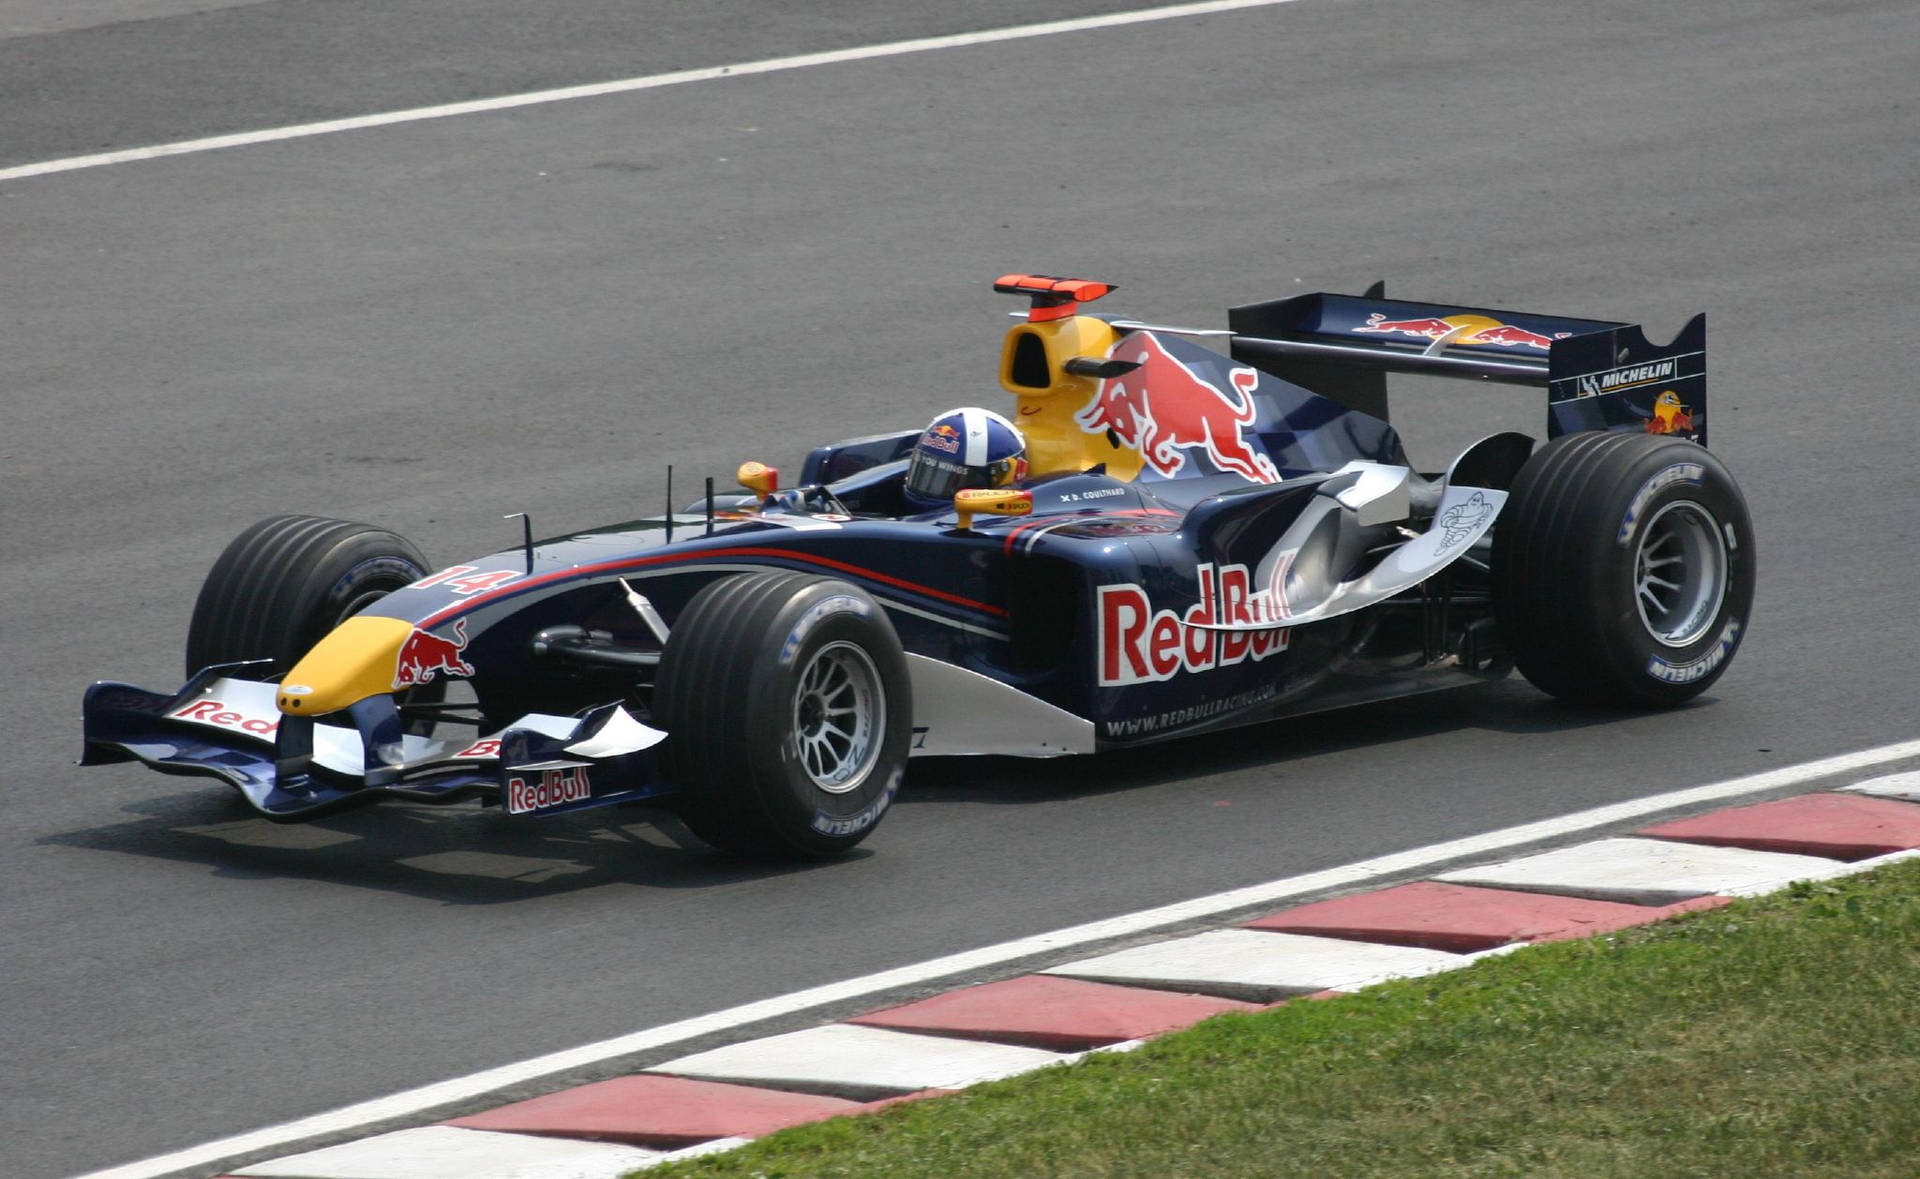 Caption: Exciting Turn Peak - Red Bull Racing with Coulthard Wallpaper